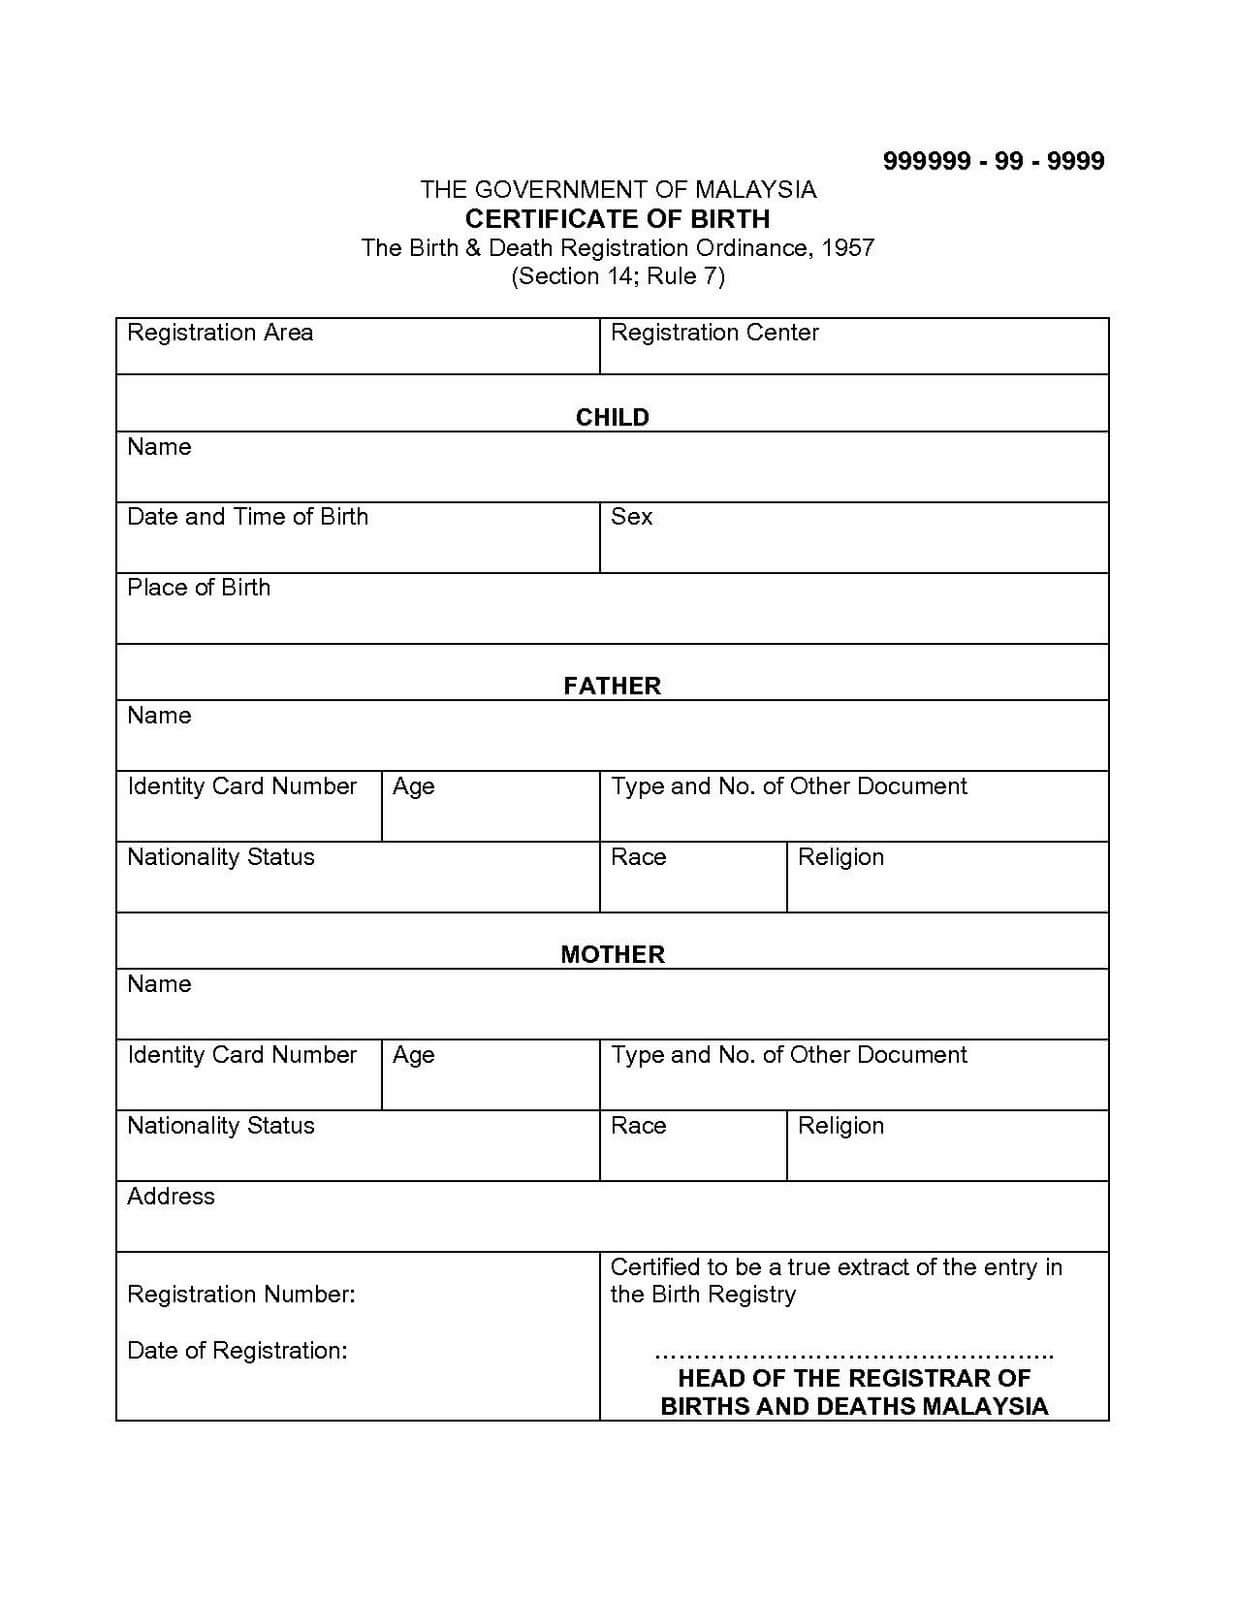 Marriage Certificate Doc Ukran Agdiffusion Com Translate Pertaining To Mexican Marriage Certificate Translation Template